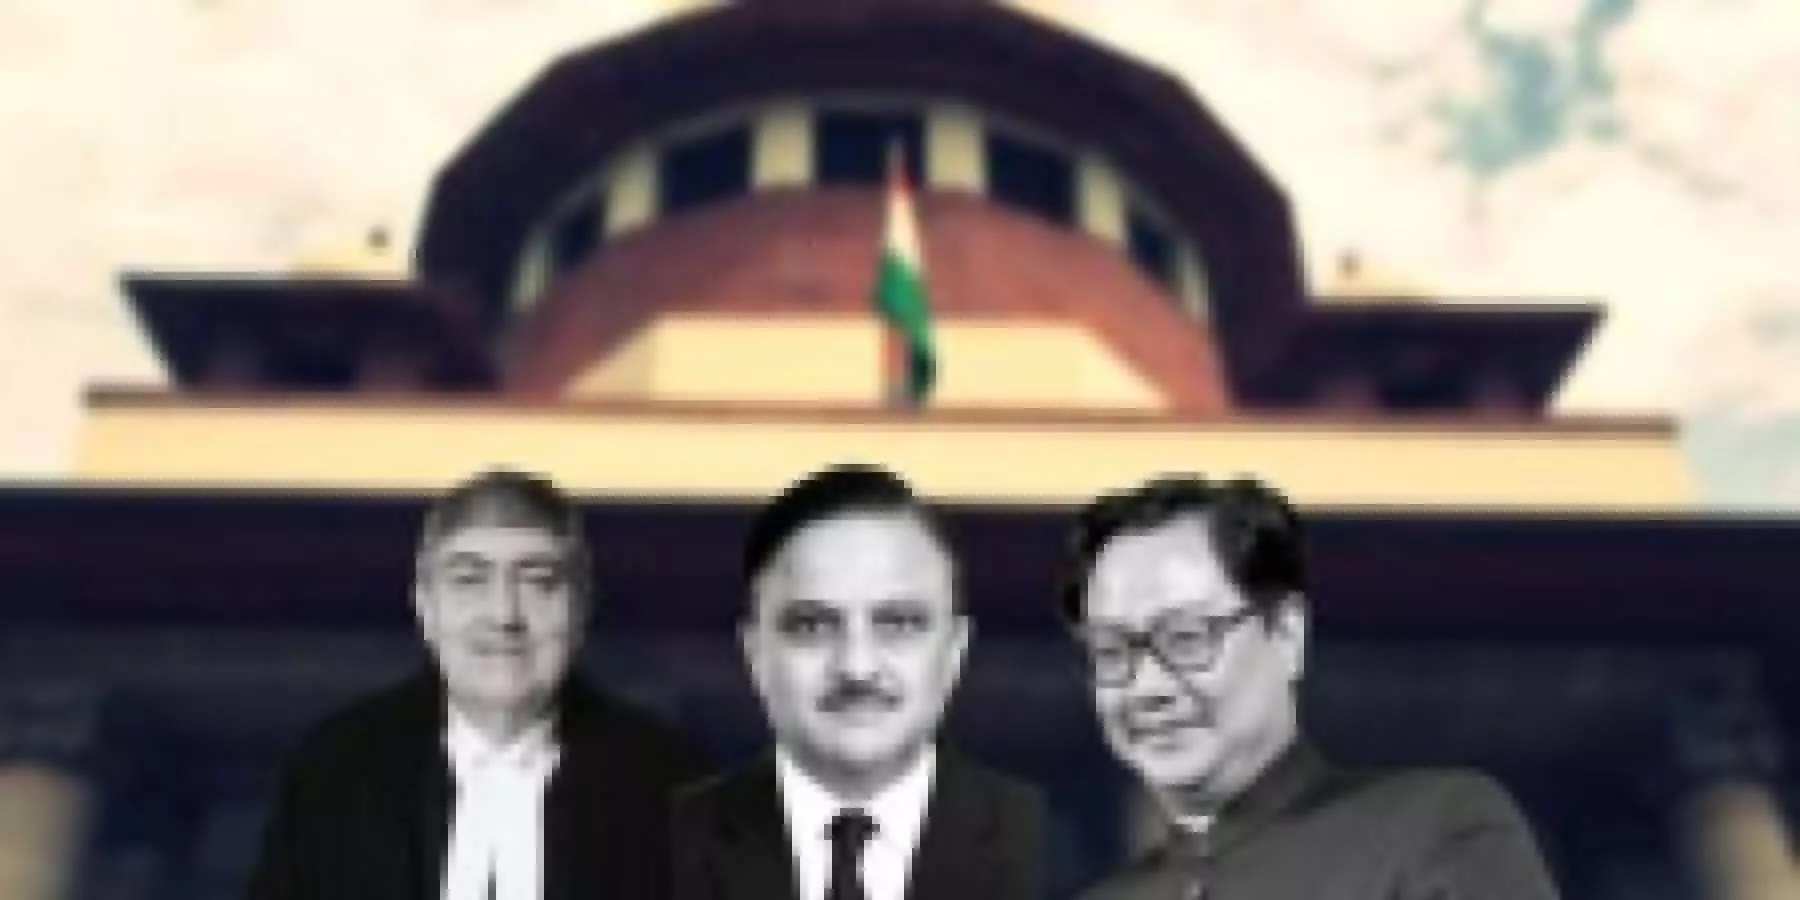 supreme court unhappy to law minister kiren rijiju comment on appointment of judges collegium system